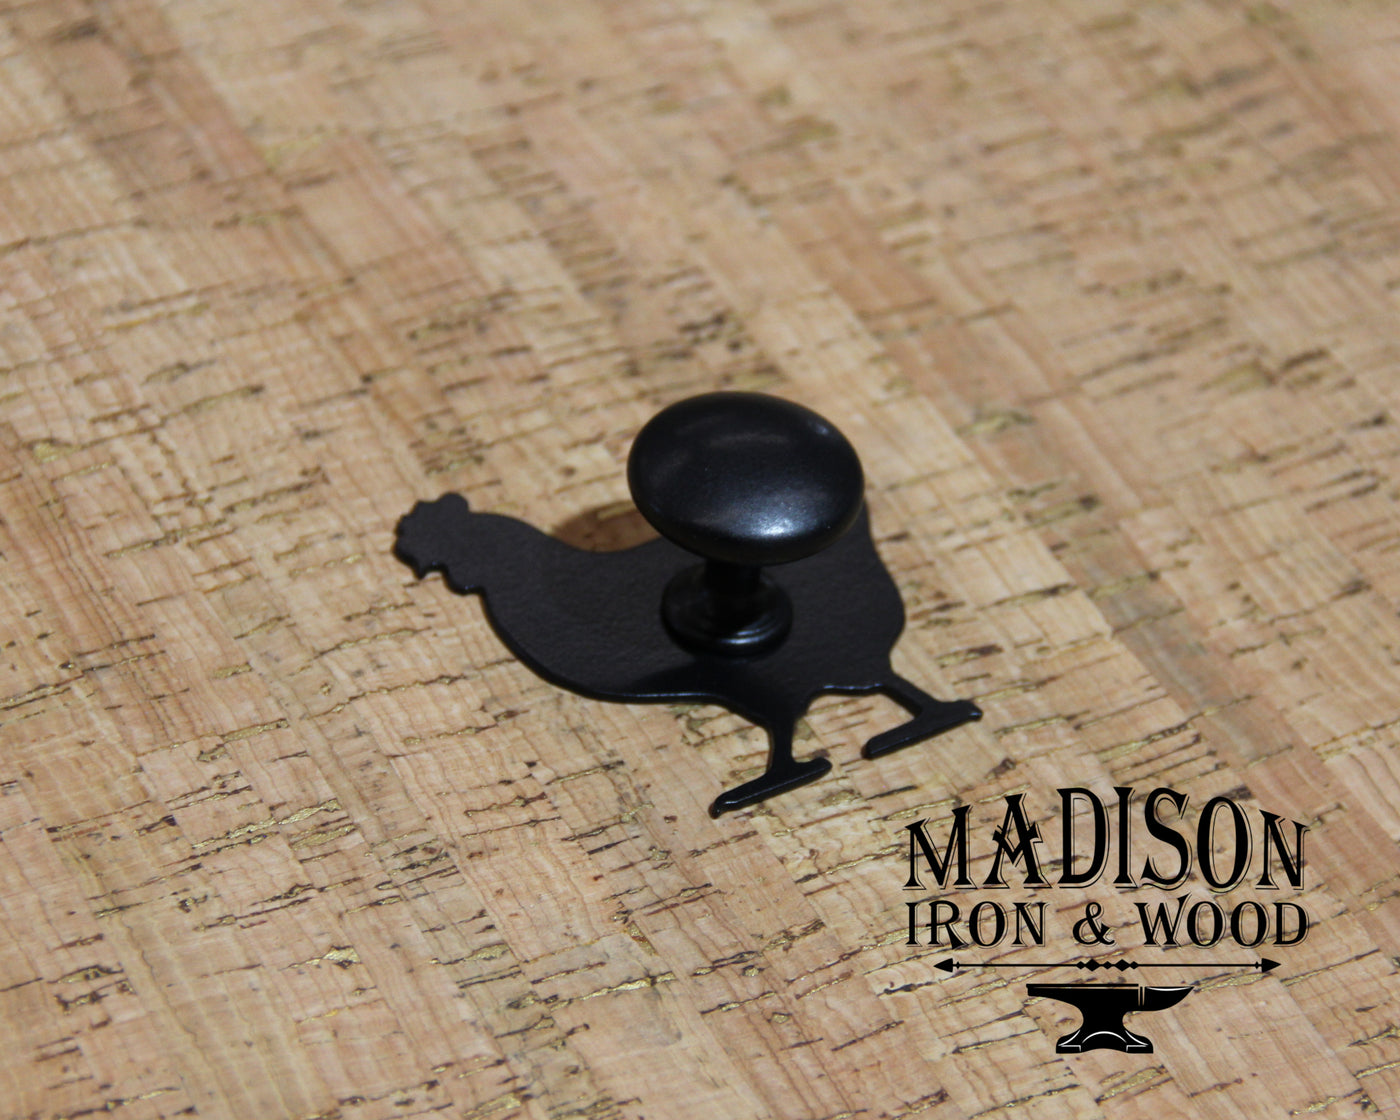 Chicken Cabinet Doorknob Decoration - Madison Iron and Wood - Door Handle Decoration - metal outdoor decor - Steel deocrations - american made products - veteran owned business products - fencing decorations - fencing supplies - custom wall decorations - personalized wall signs - steel - decorative post caps - steel post caps - metal post caps - brackets - structural brackets - home improvement - easter - easter decorations - easter gift - easter yard decor